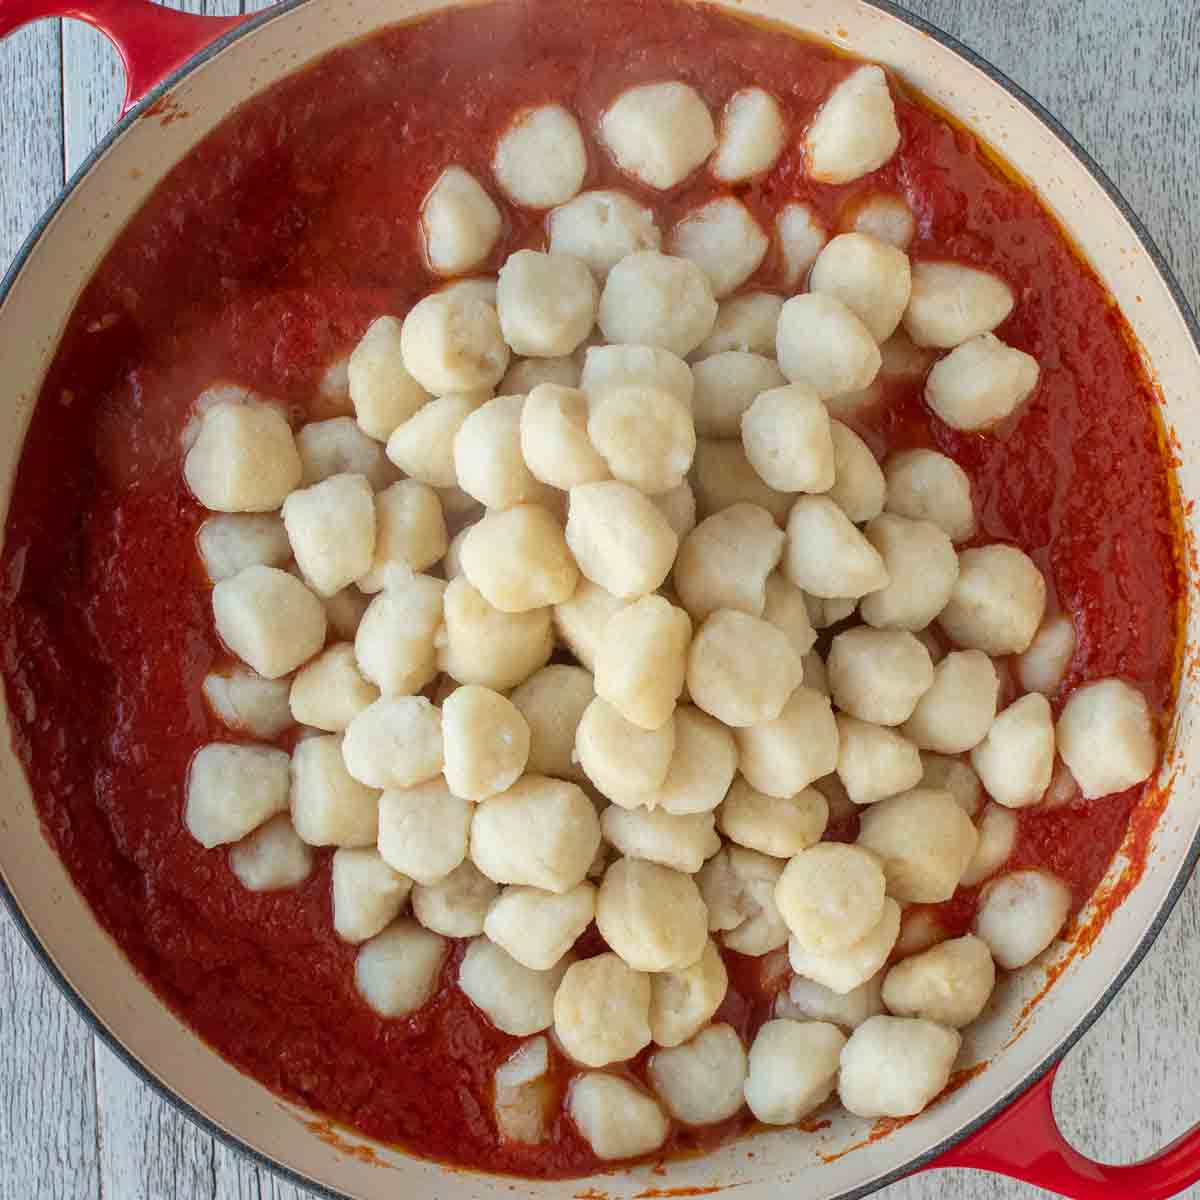 Overhead view of gnocchi on top of tomato sauce.